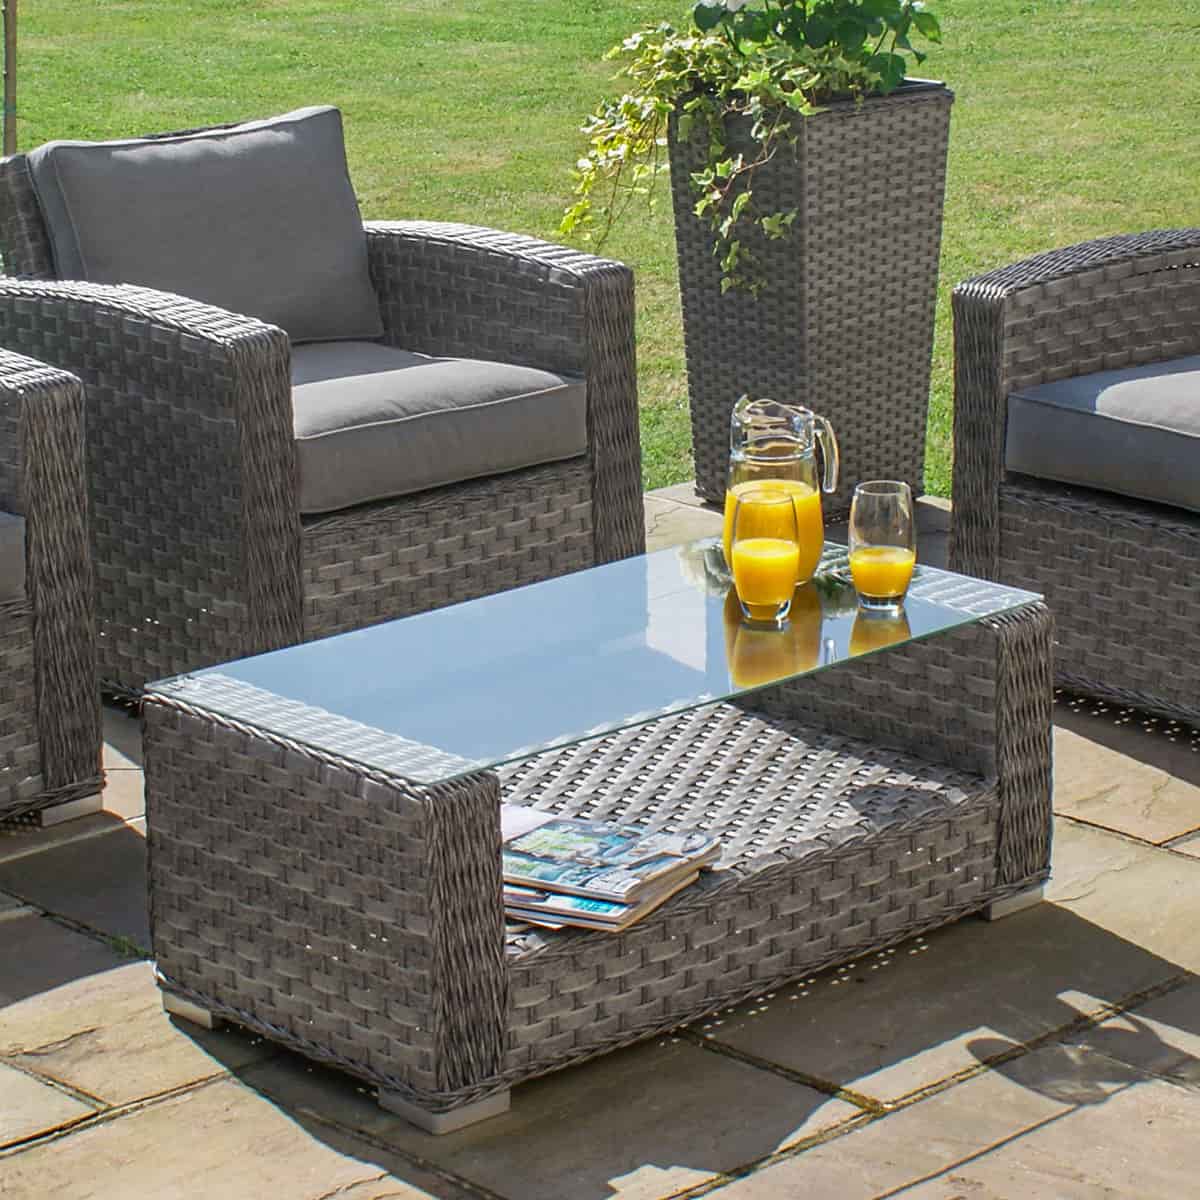 Grey rattan 2 seat sofa set with two armchairs and a matching coffee table with glass table top